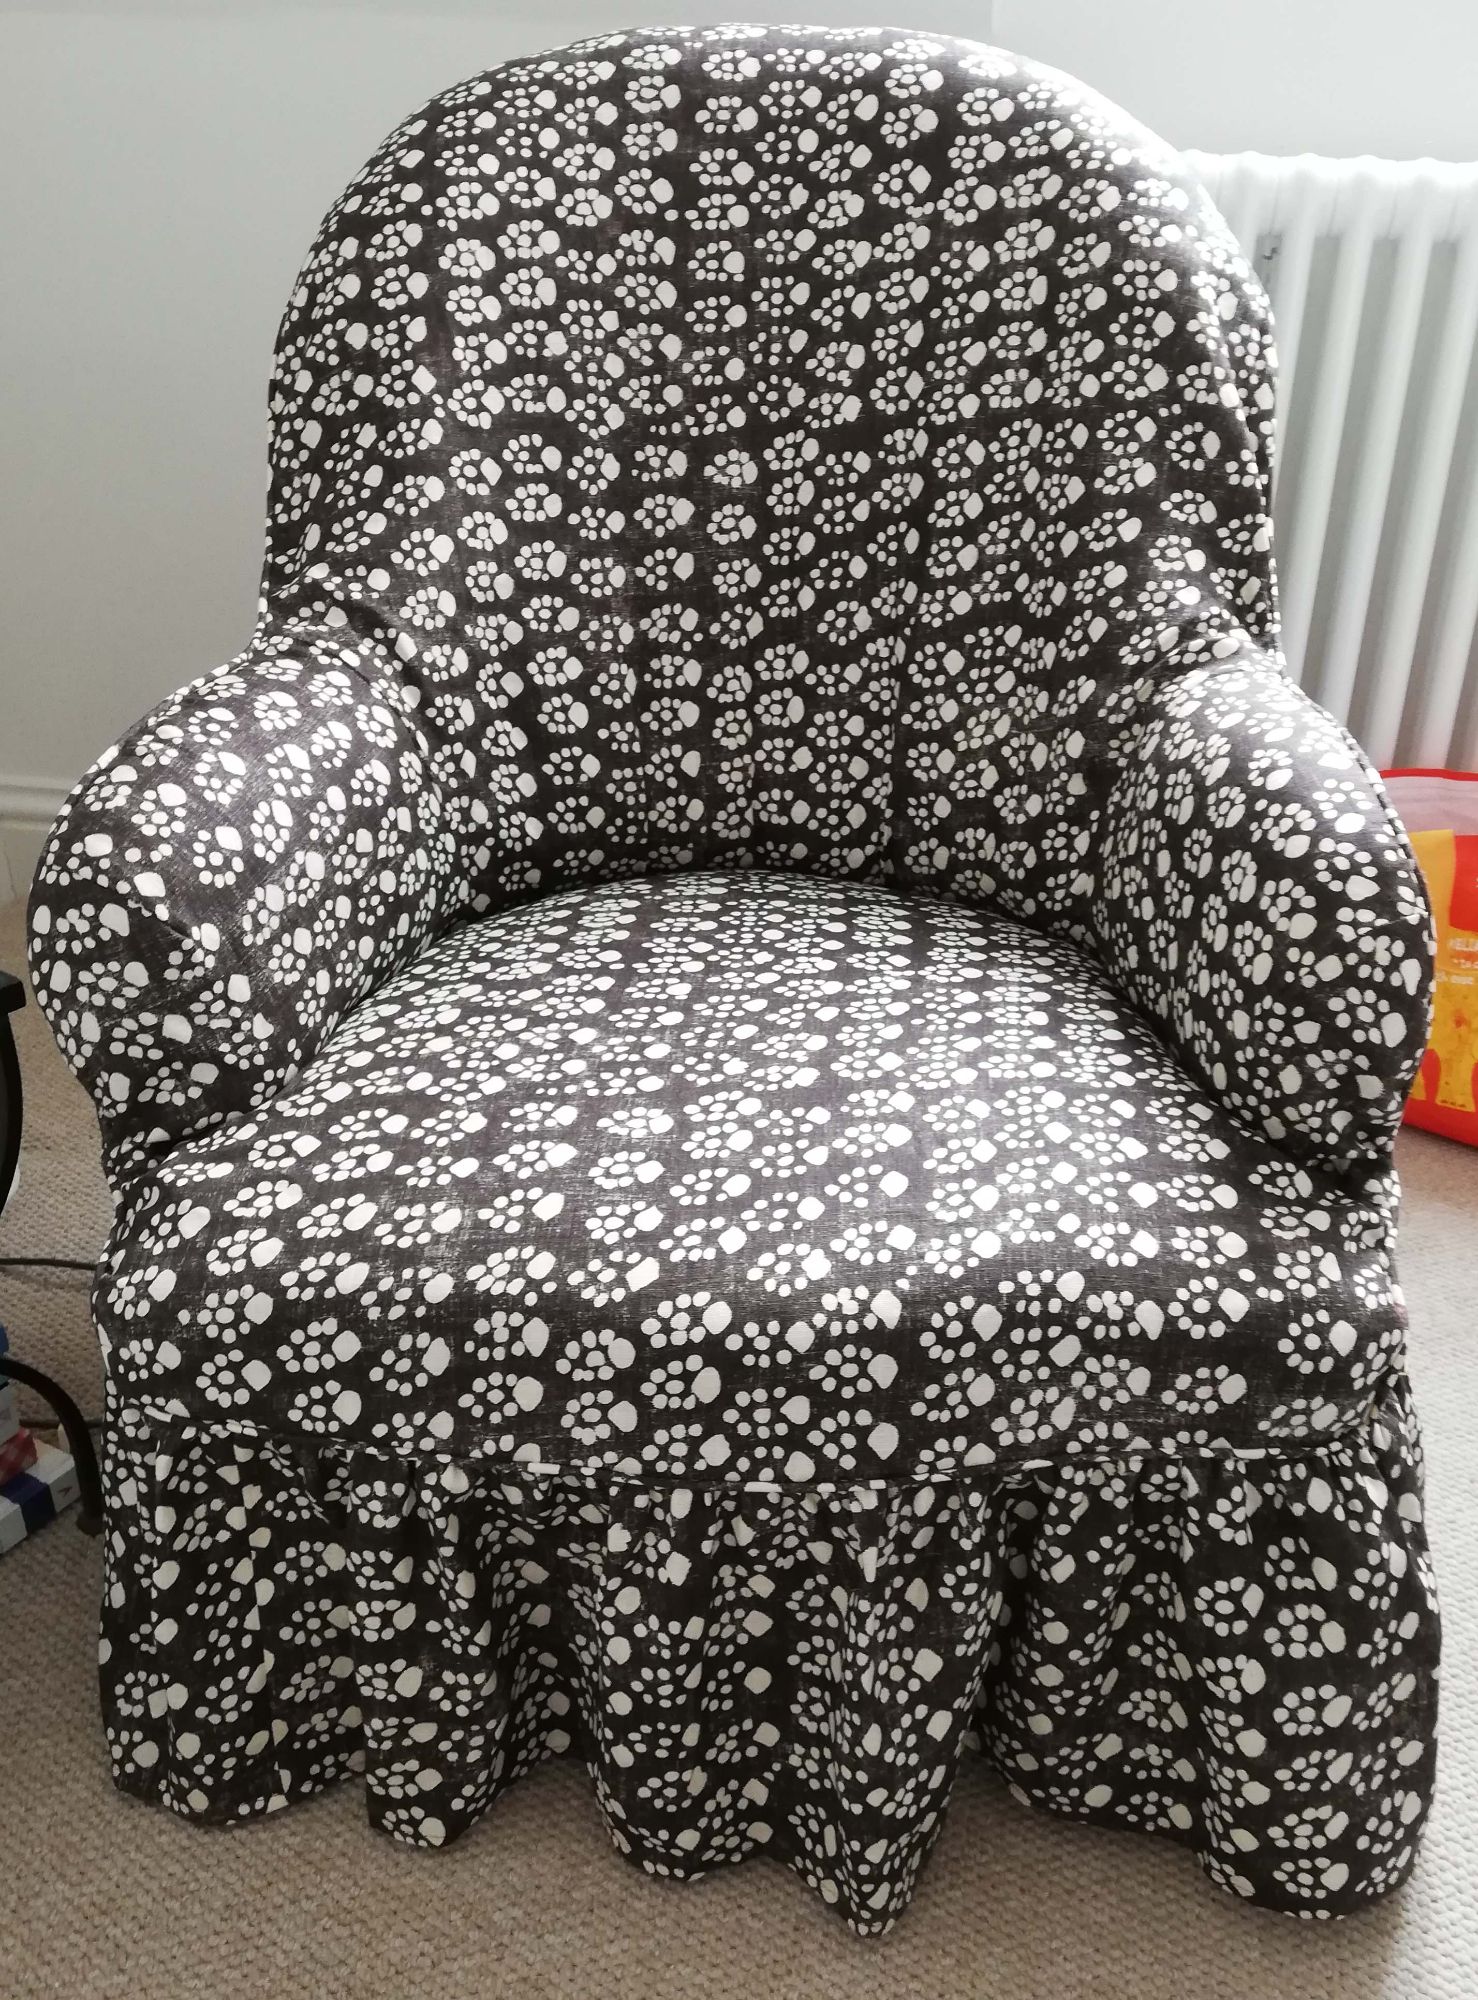 Paw print chair cover